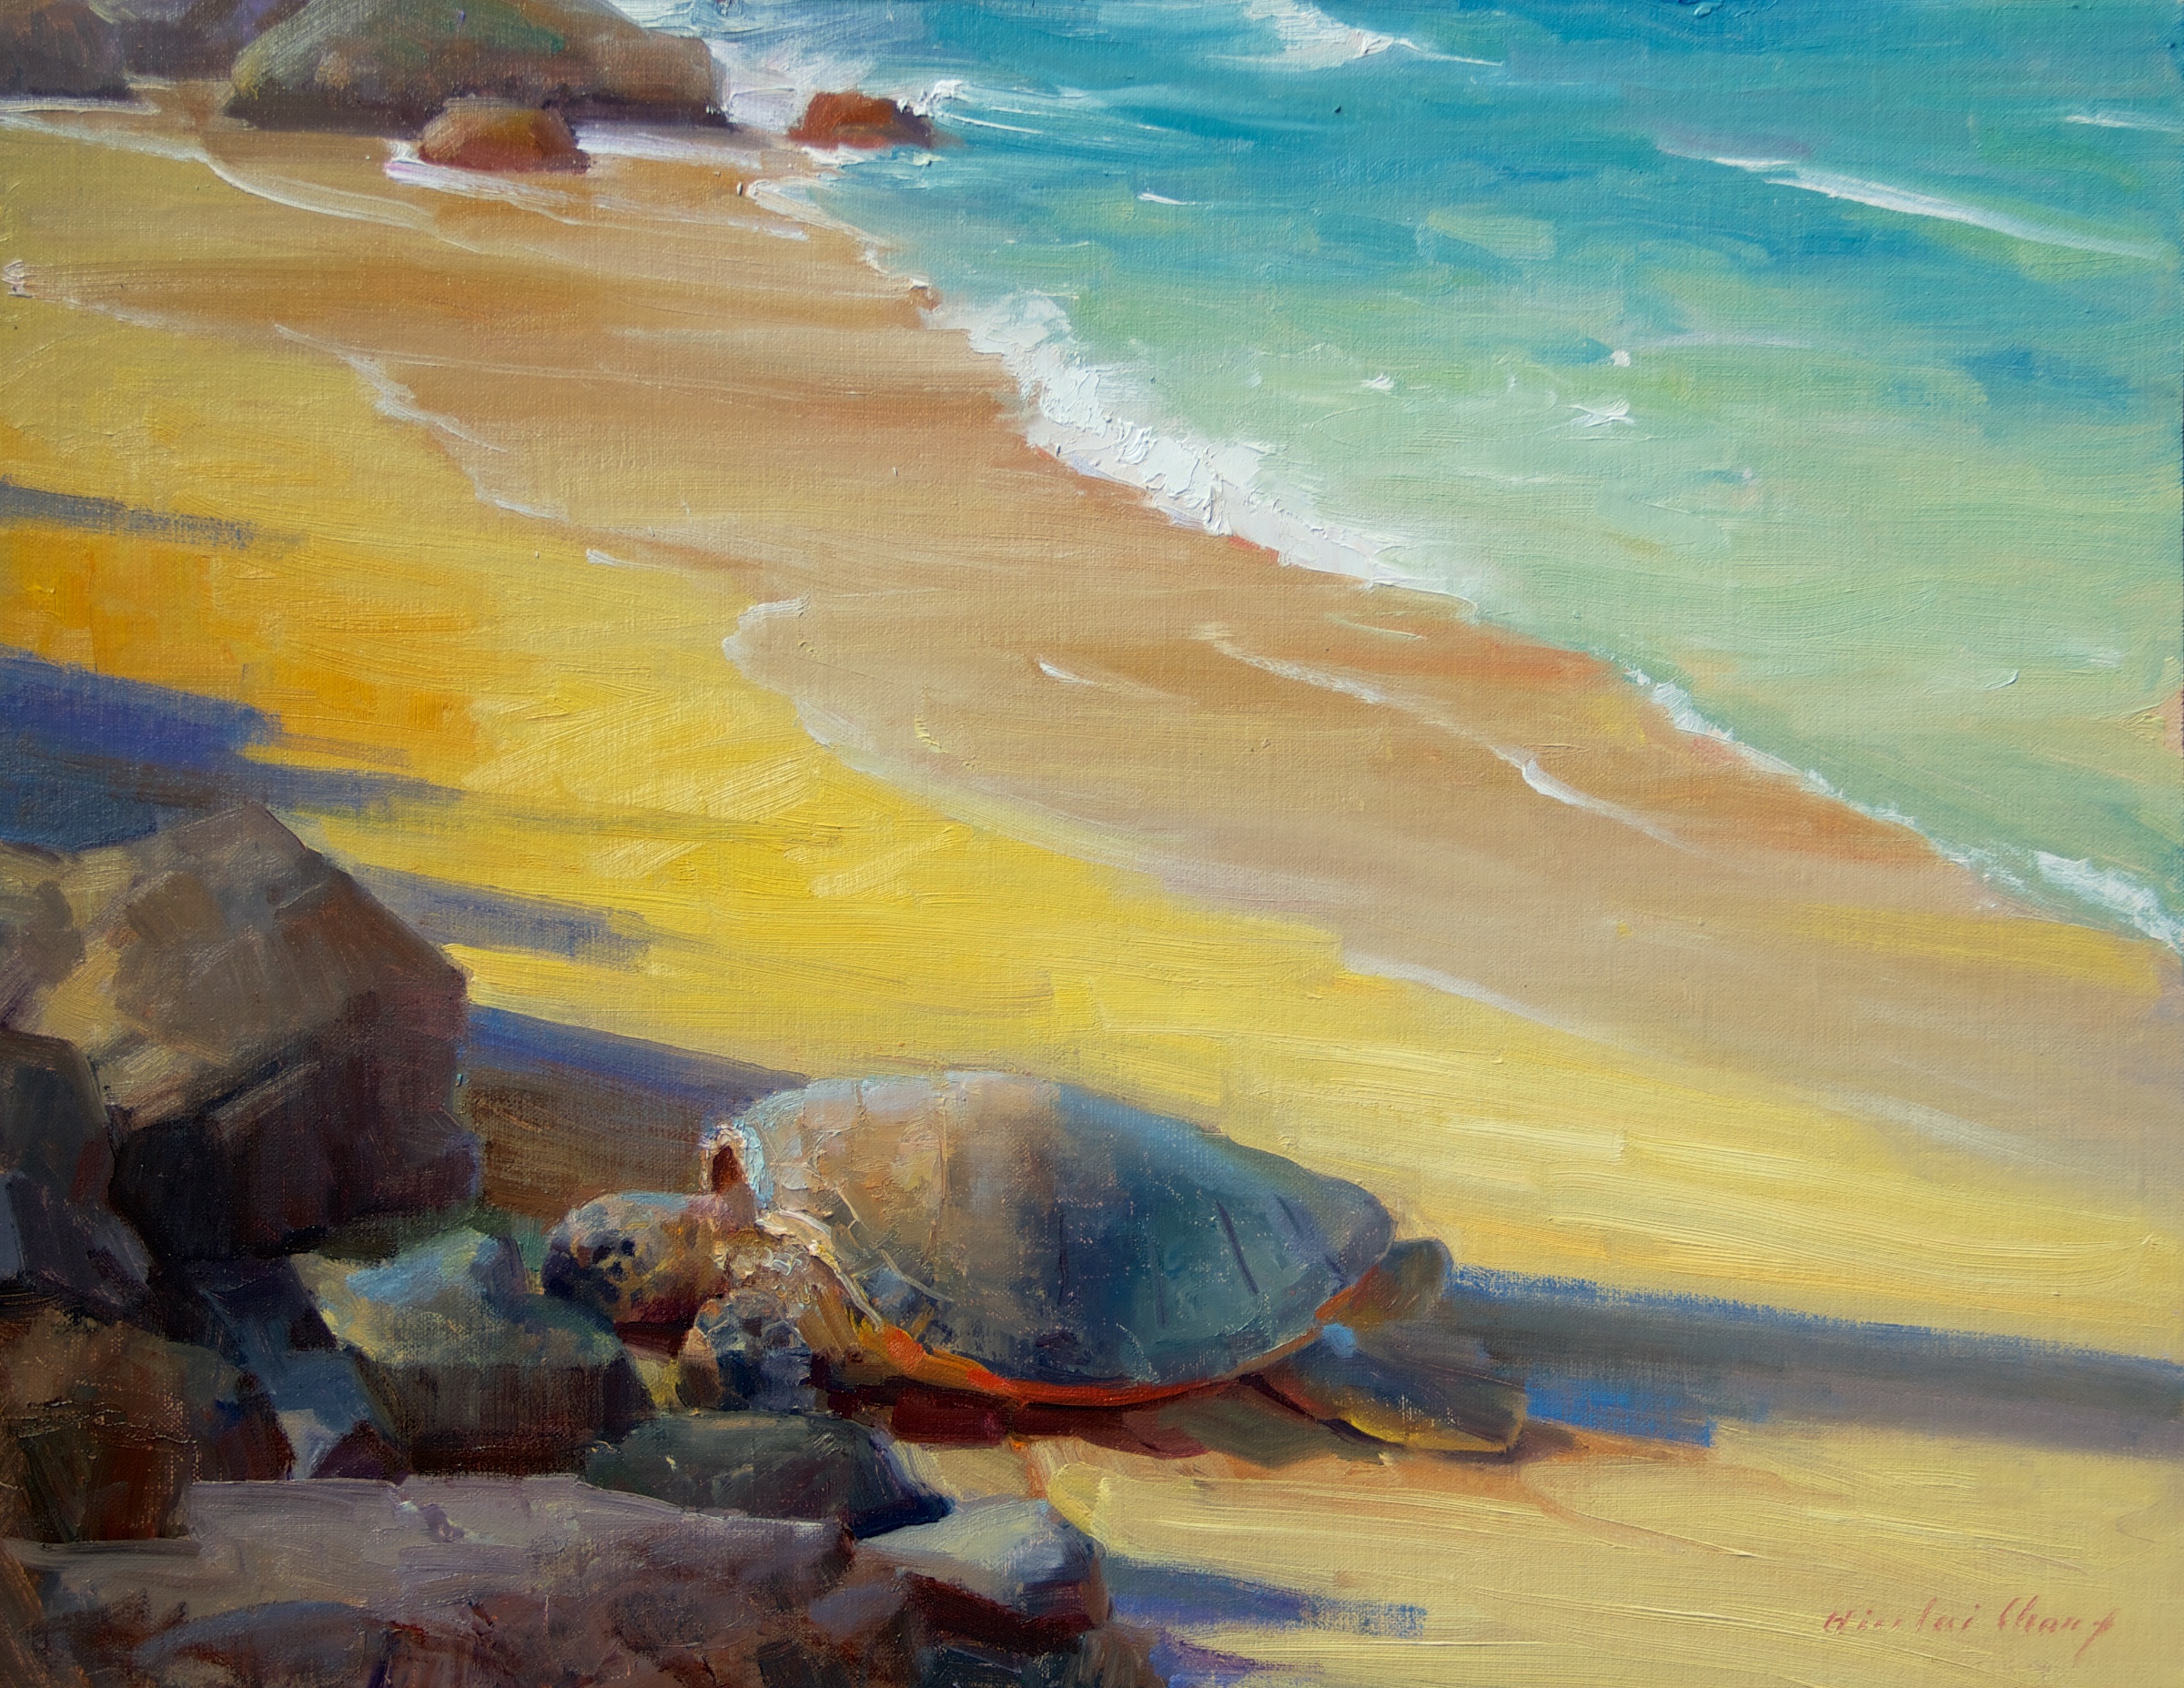 Hiu Lai Chongʻs rendering of a Maui honu, “Sunbathing,” in Lahaina. Chong will be conducting a workshop on Maui, Feb. 9-11. Photo provided by